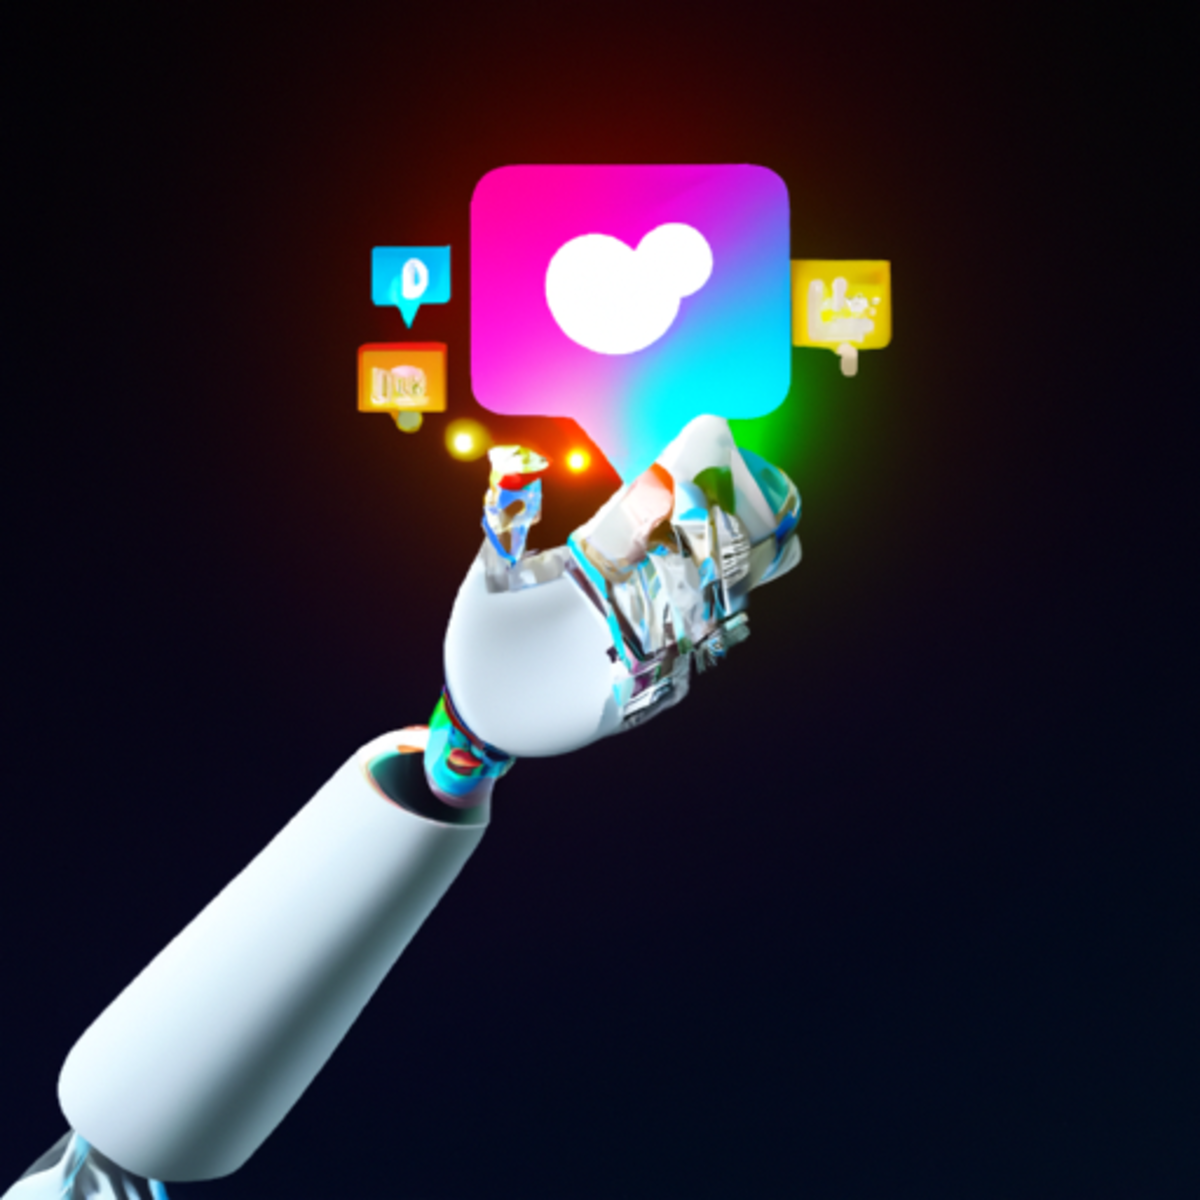 Abstract digital art of a robot hand holding a social media icon, symbolizing the role of AI in social media marketing.